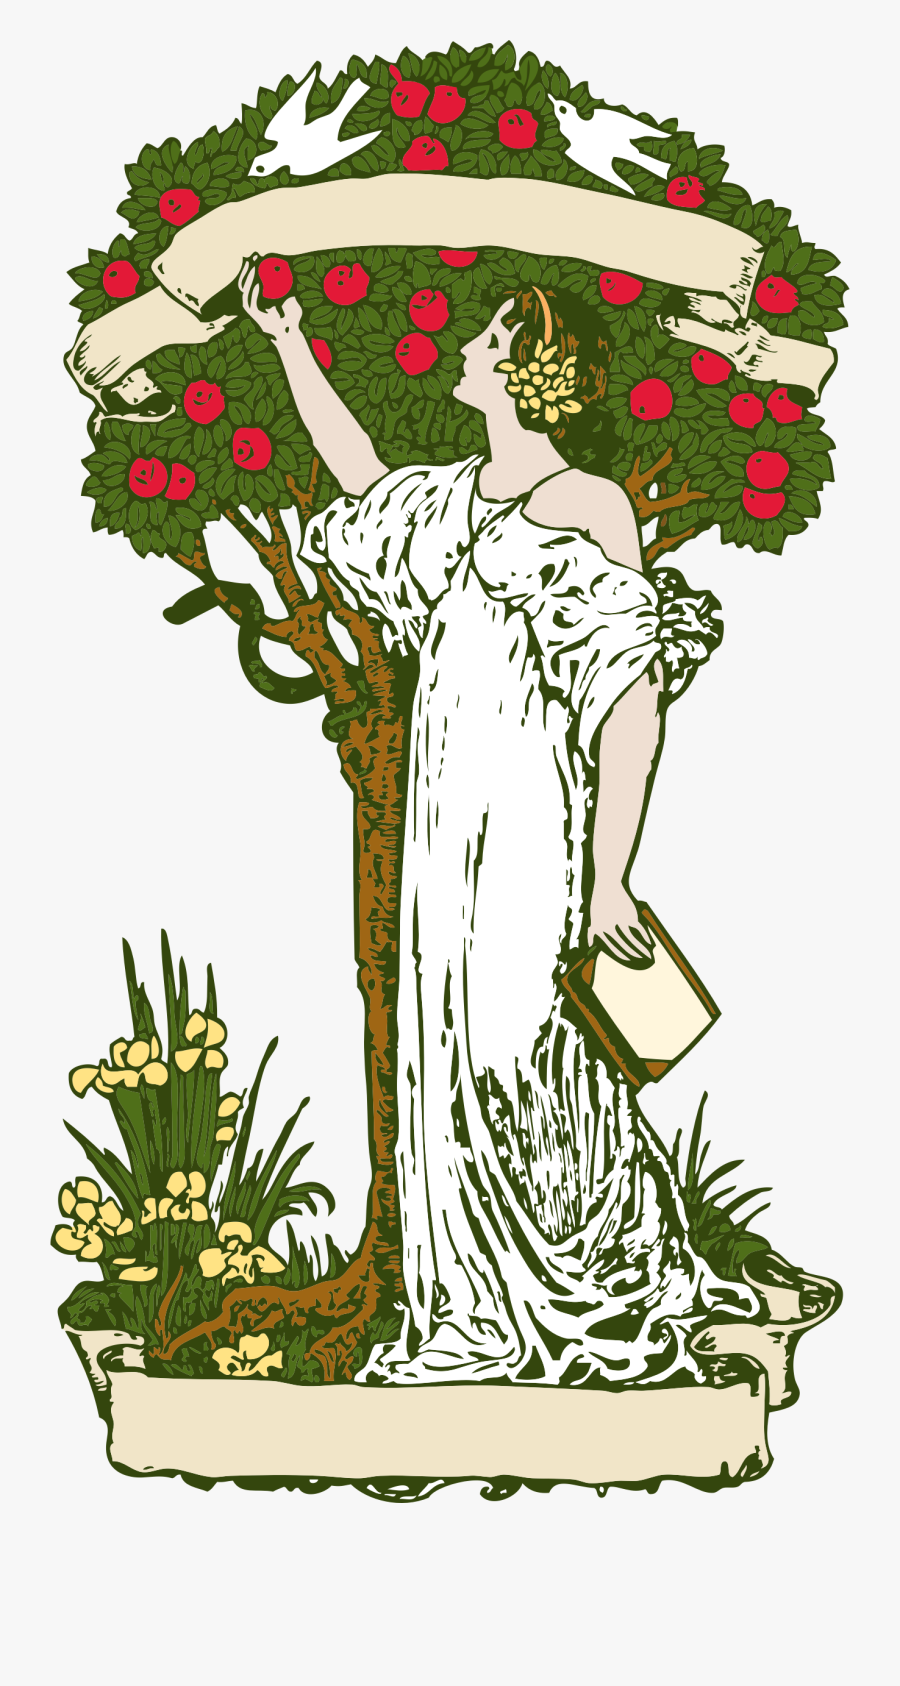 Woman At Apple Tree - Tree Of Knowledge Transparent, Transparent Clipart